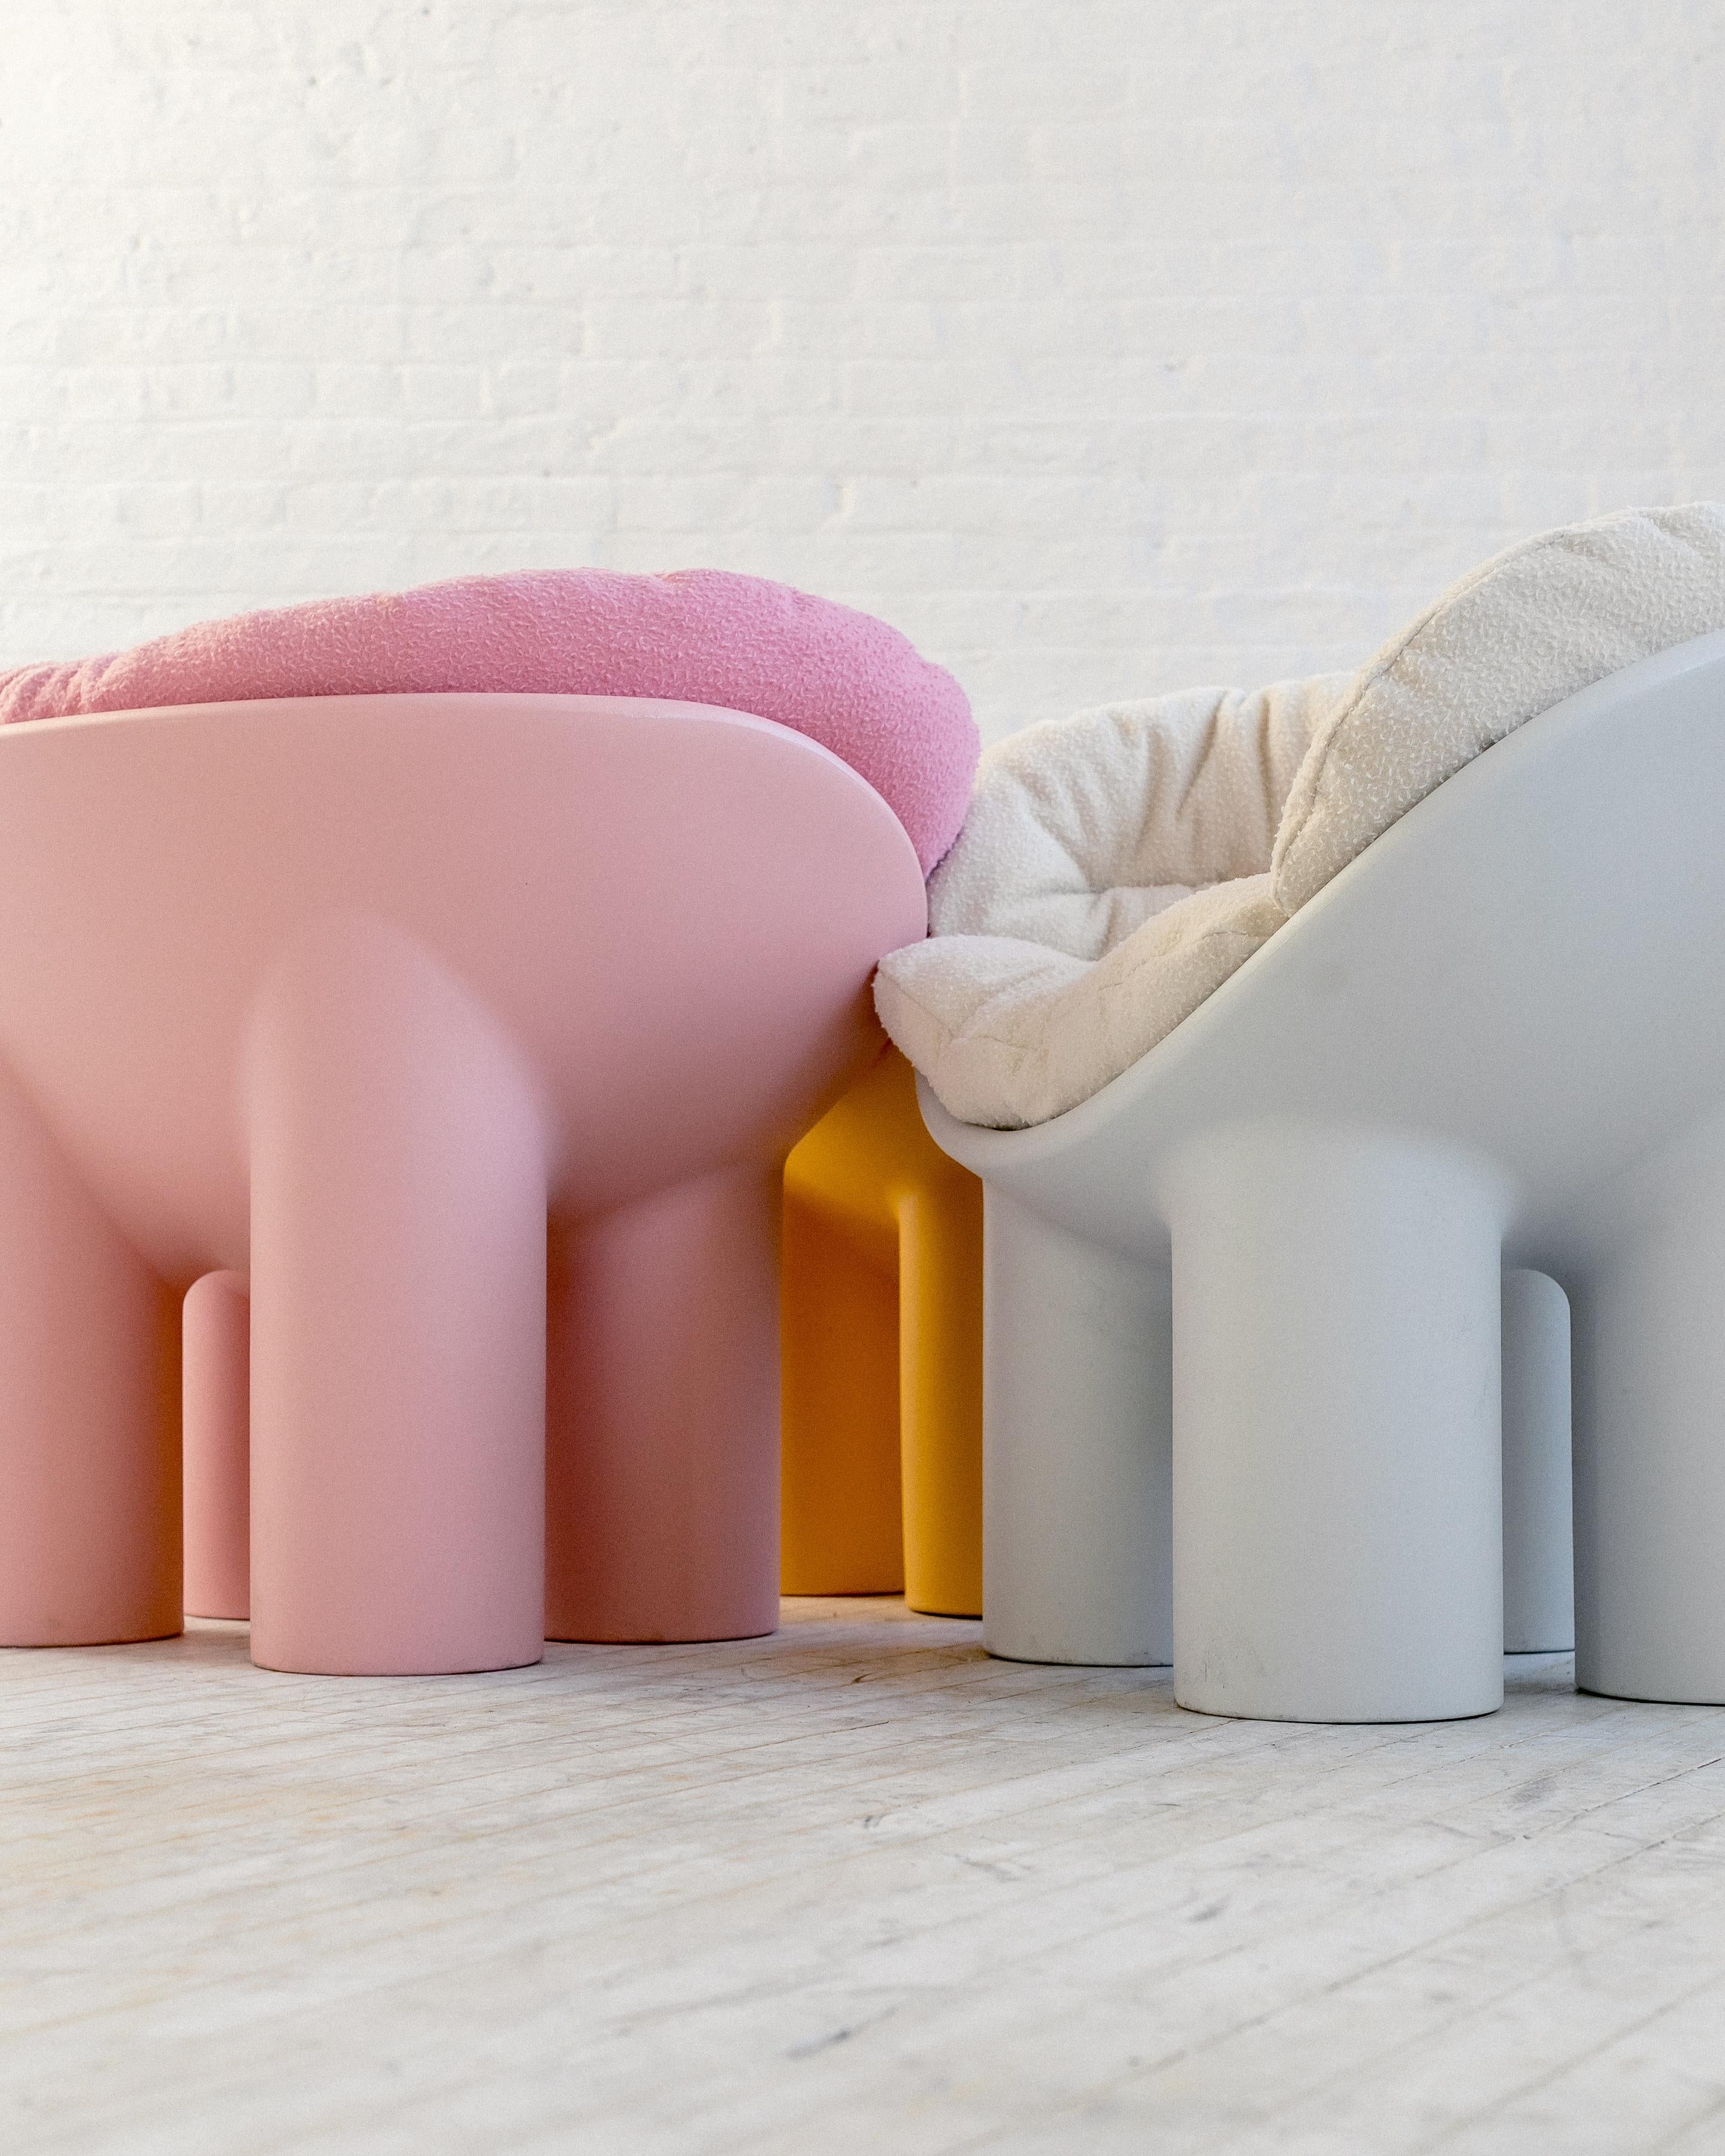 Roly Poly Armchair in Pink by Faye Toogood with Casentino cushions  For Sale 5